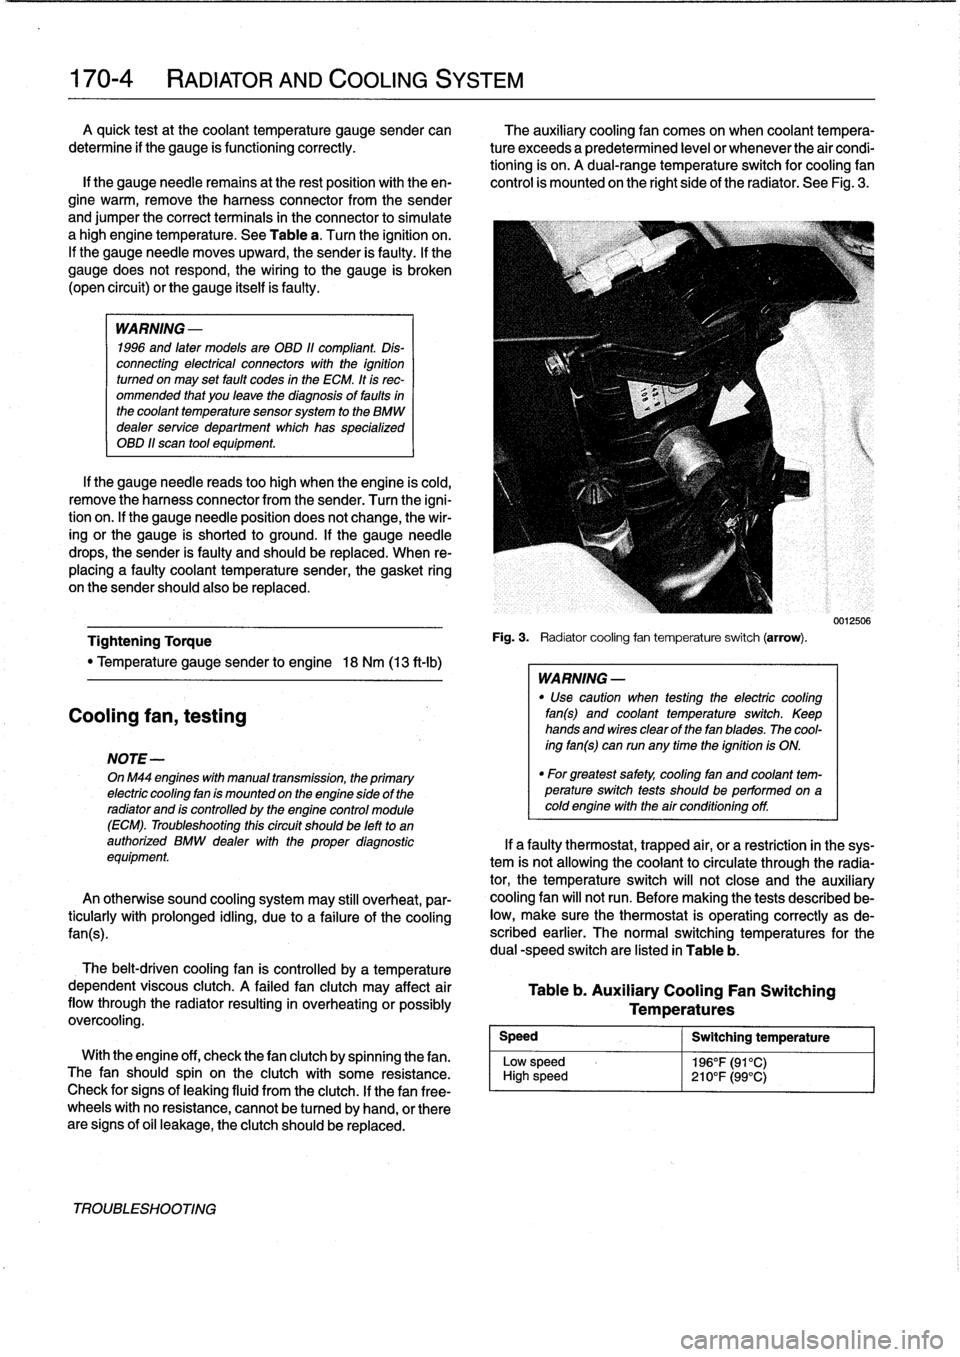 BMW 318i 1997 E36 Workshop Manual 
170-
4

	

RADIATOR
AND
COOLING
SYSTEM
A
quick
testat
the
coolant
temperature
gauge
sender
can

	

The
auxiliary
cooling
fan
comes
on
when
coolant
tempera

determine
if
the
gauge
is
functioning
corre